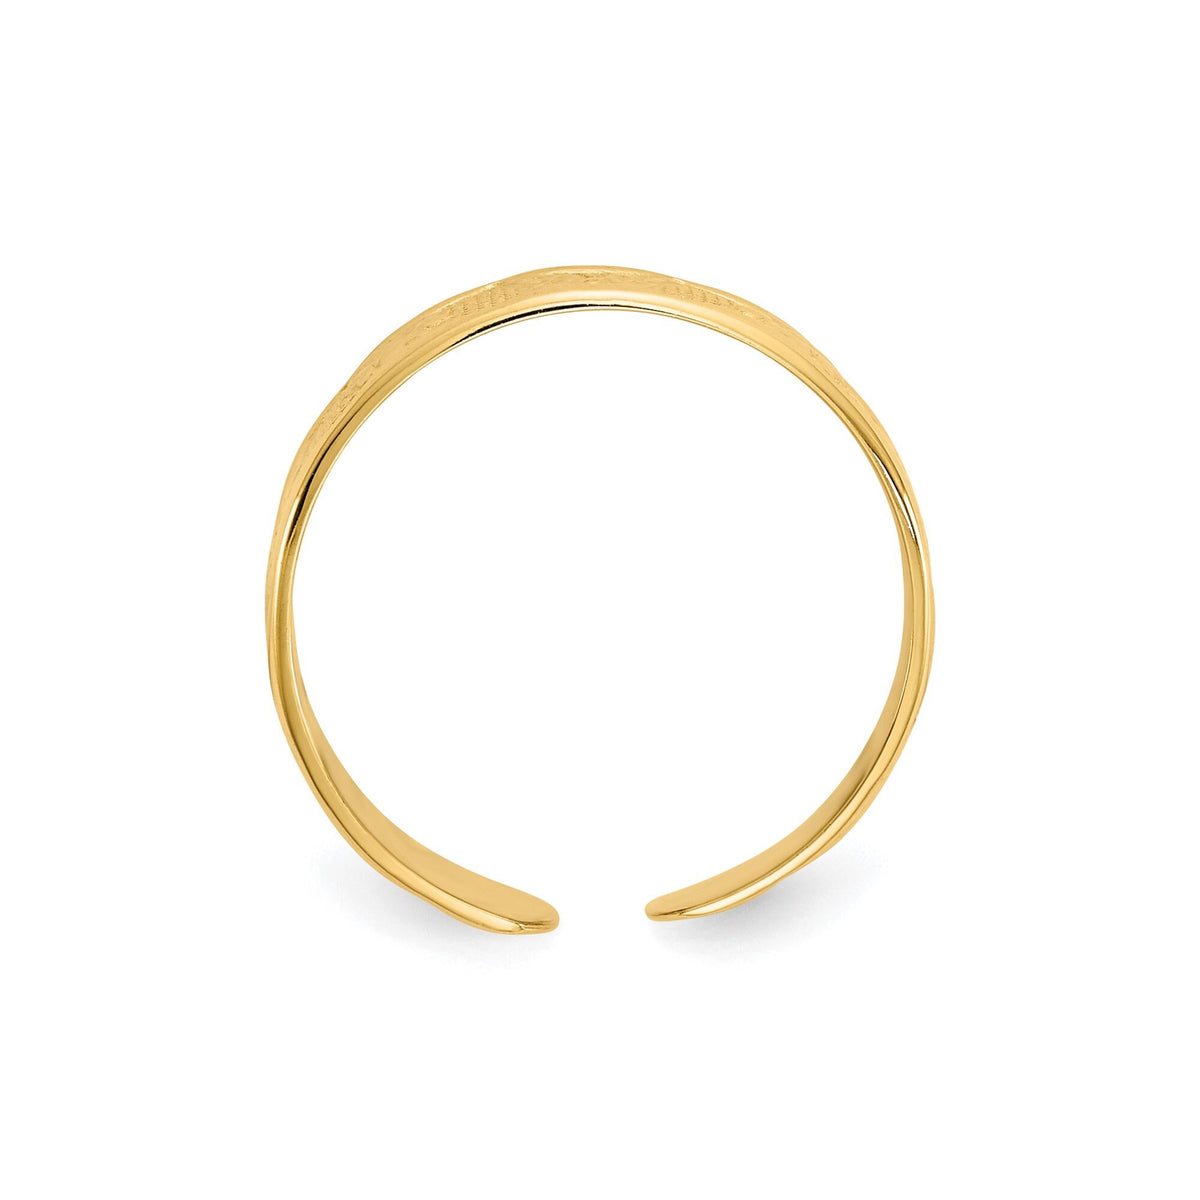 14k Yellow Gold Solid Toe Ring 3mm Band- Gift Box Included